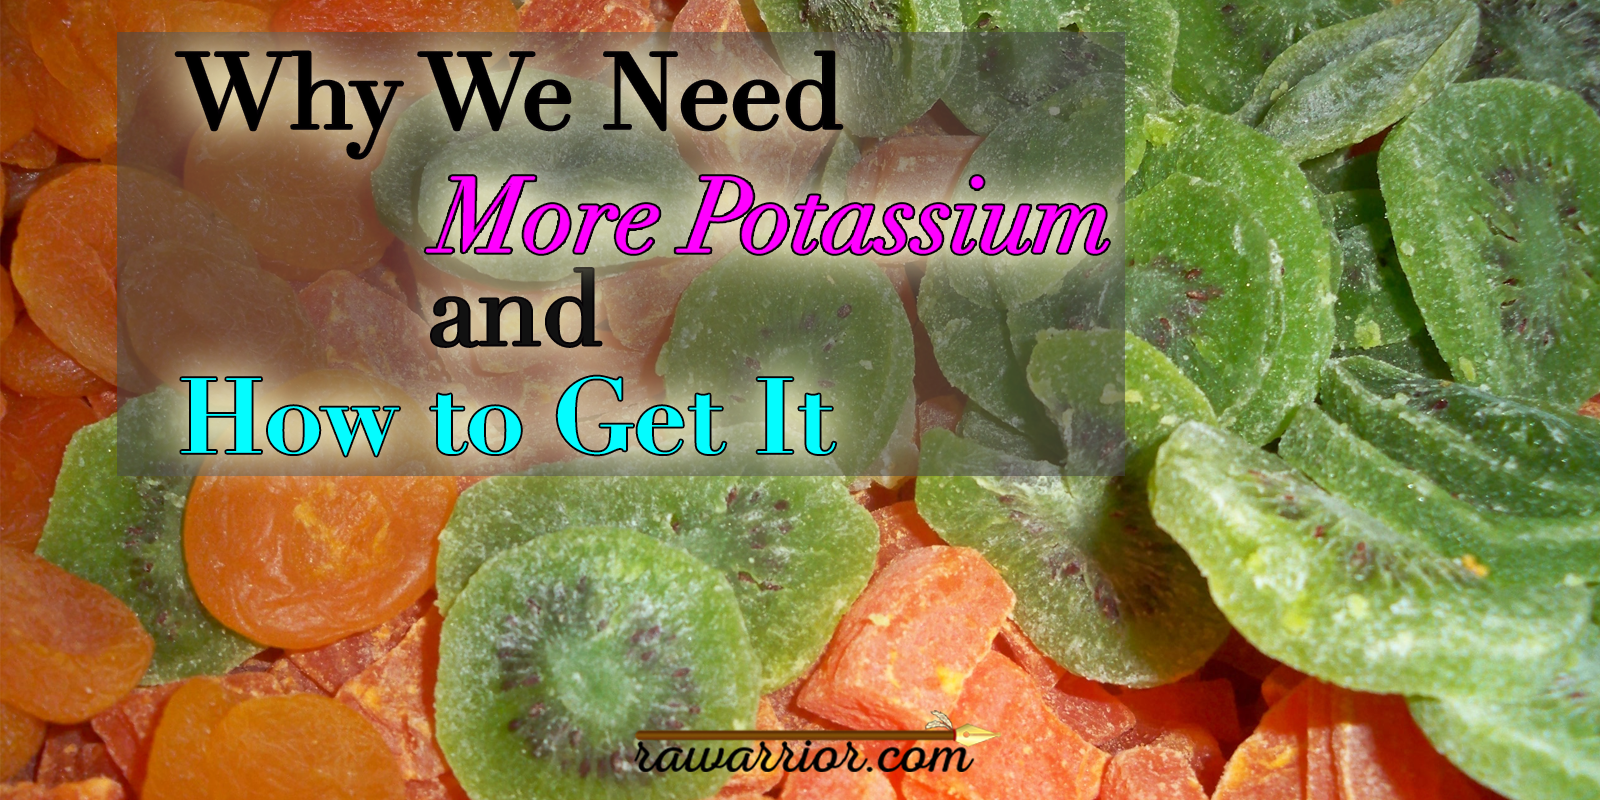 Why We Need More Potassium and How to Get It